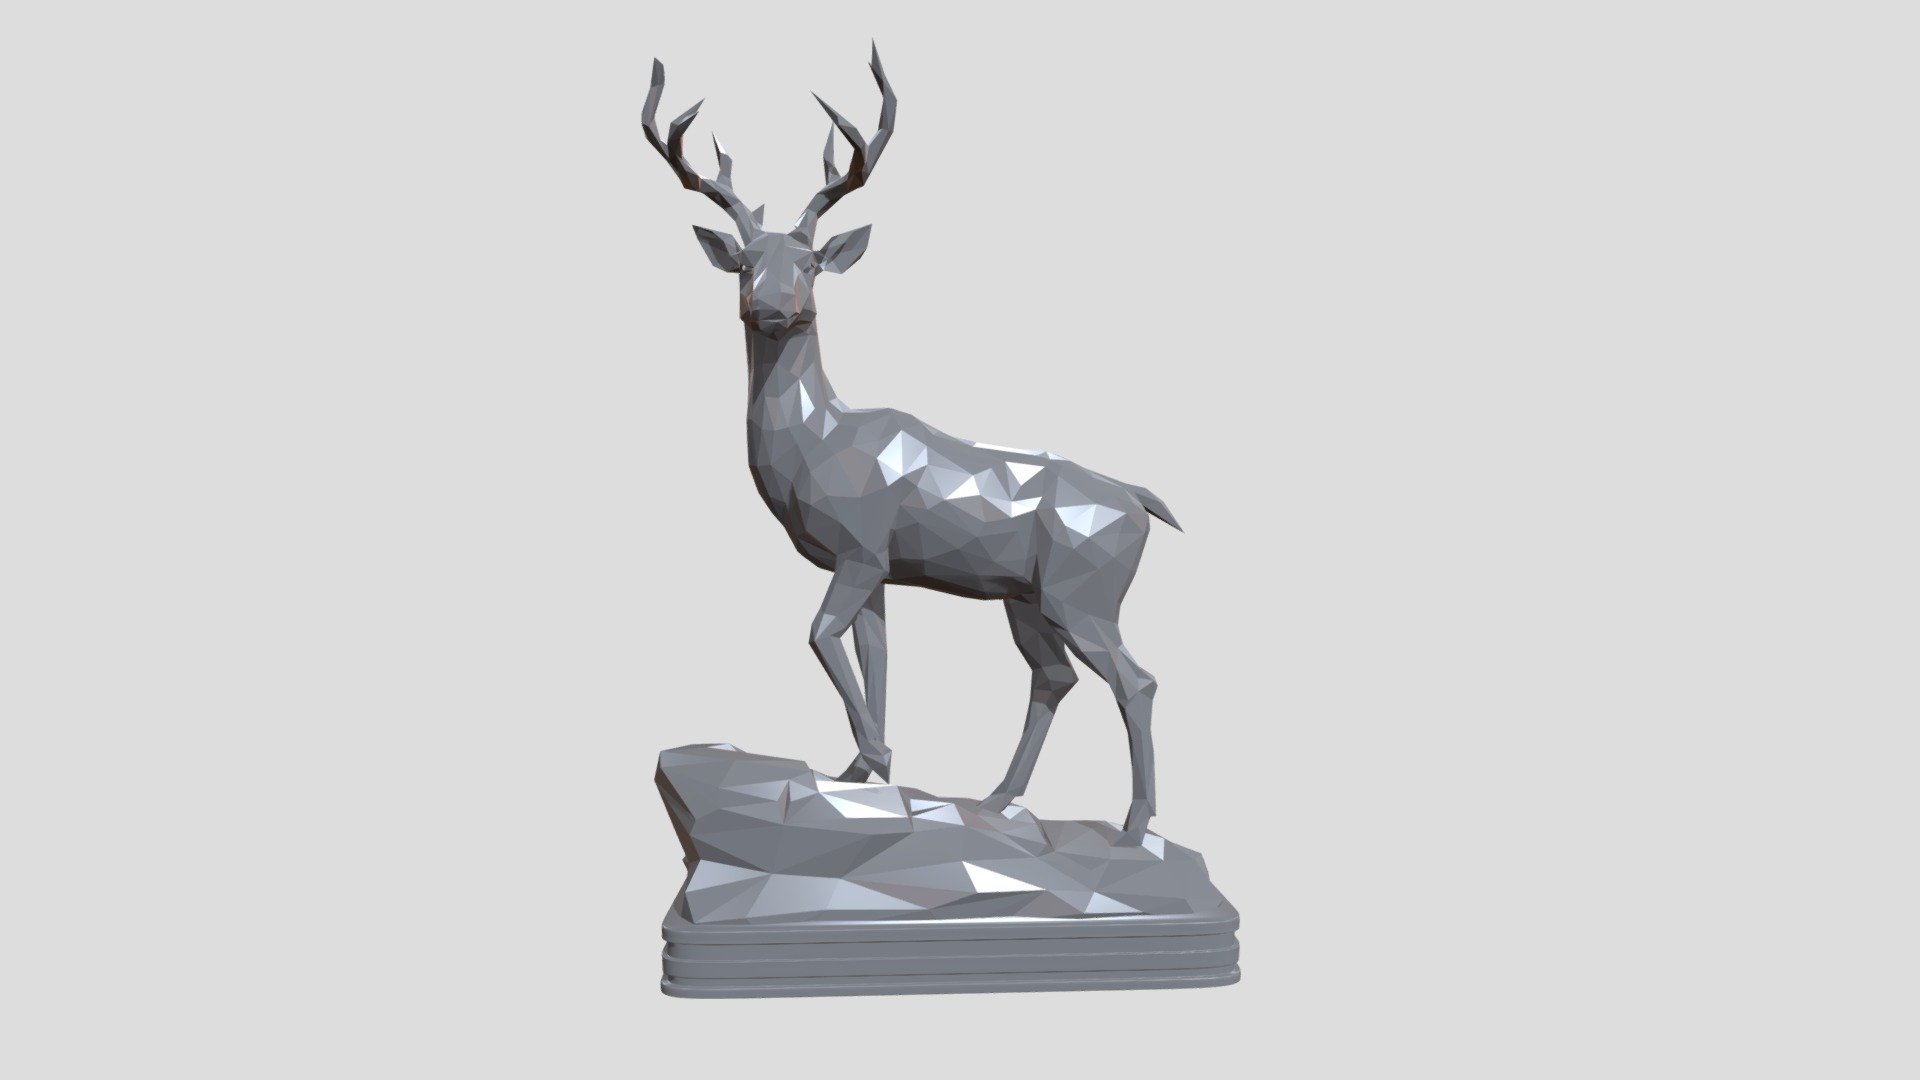 Deer LowPoly High Poly, sculpted in ZBrush 2020. Maybe used for Jewelry design, interiour design, digital visualisation, for the production of illustrations. Default size - 20 cm tall (you can scale it up or down). Ideal for printing 3D
3D Printing
Compositions
Decoration
Motion graphics - Destruction of solids
Etc....
Does not contain UVs Maps
Piece with 20 cm

Does not contain lighting
I hope it will be useful in your project !
Thank you for visiting my models !! - Deer  LowPoly - Buy Royalty Free 3D model by aleexstudios 3d model